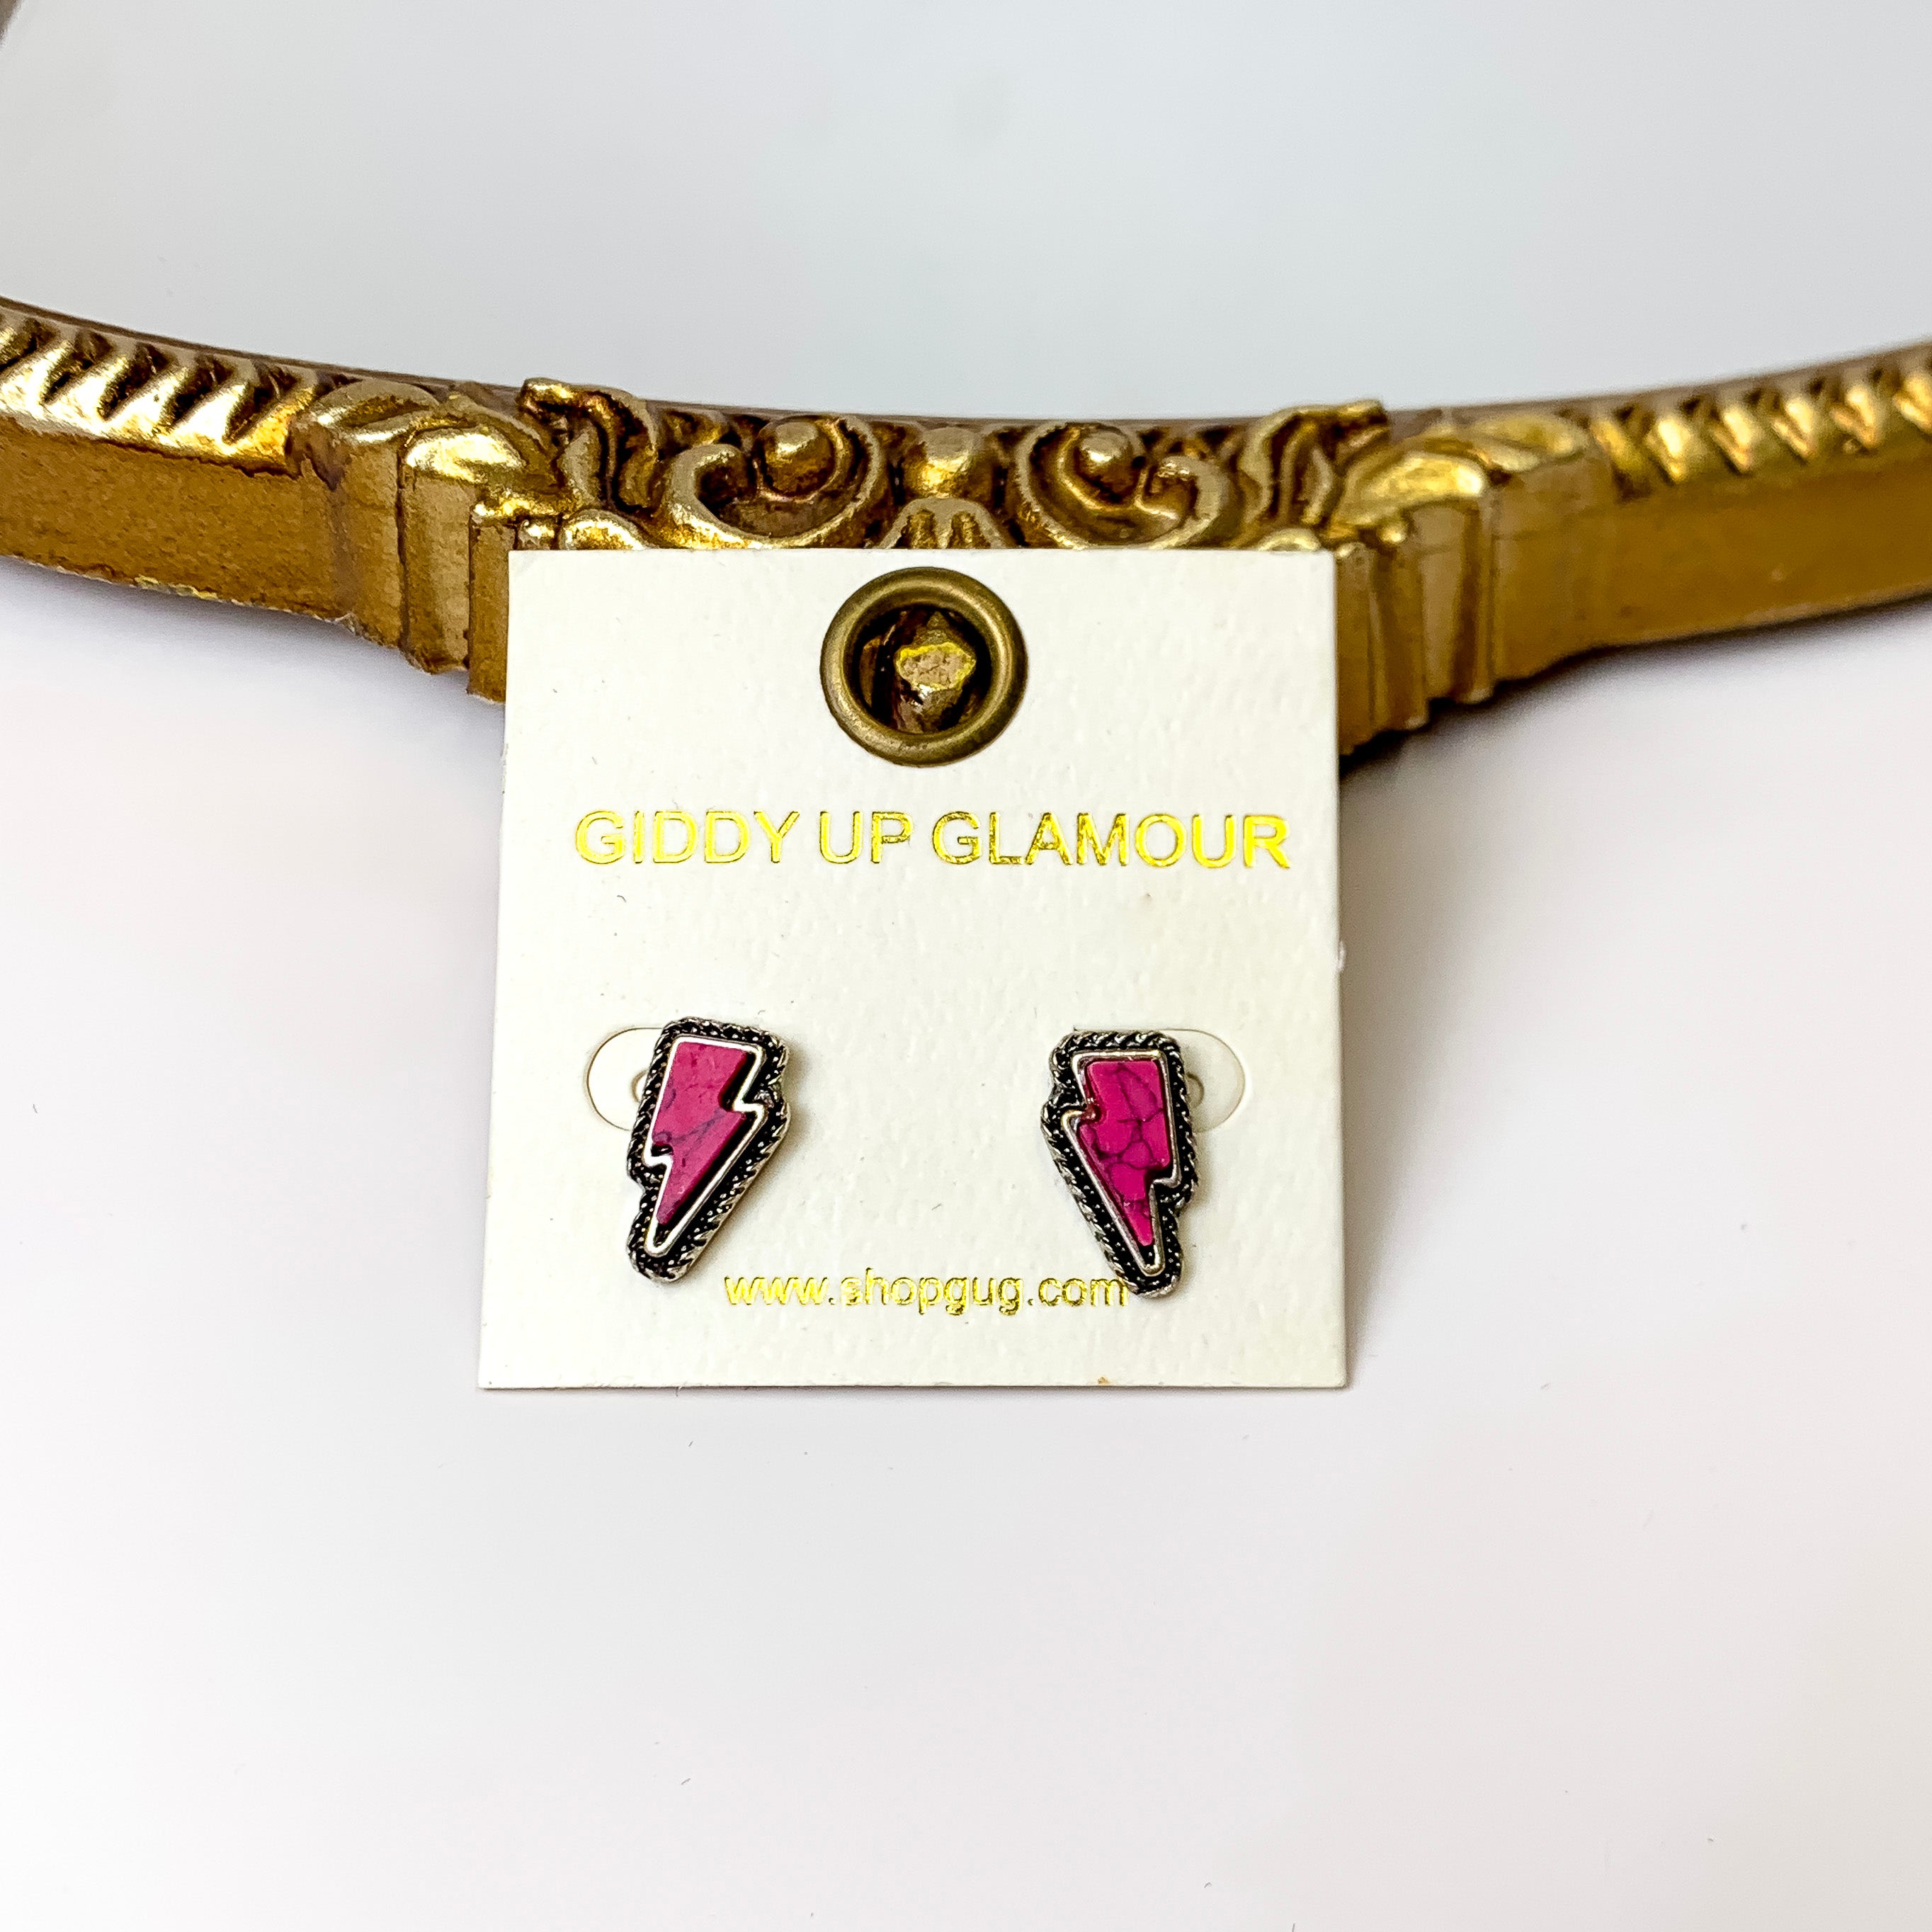 Everyday Excitement Mini Lightning Bolt Stone Stud Earrings in Fuchsia Pink - Giddy Up Glamour Boutique